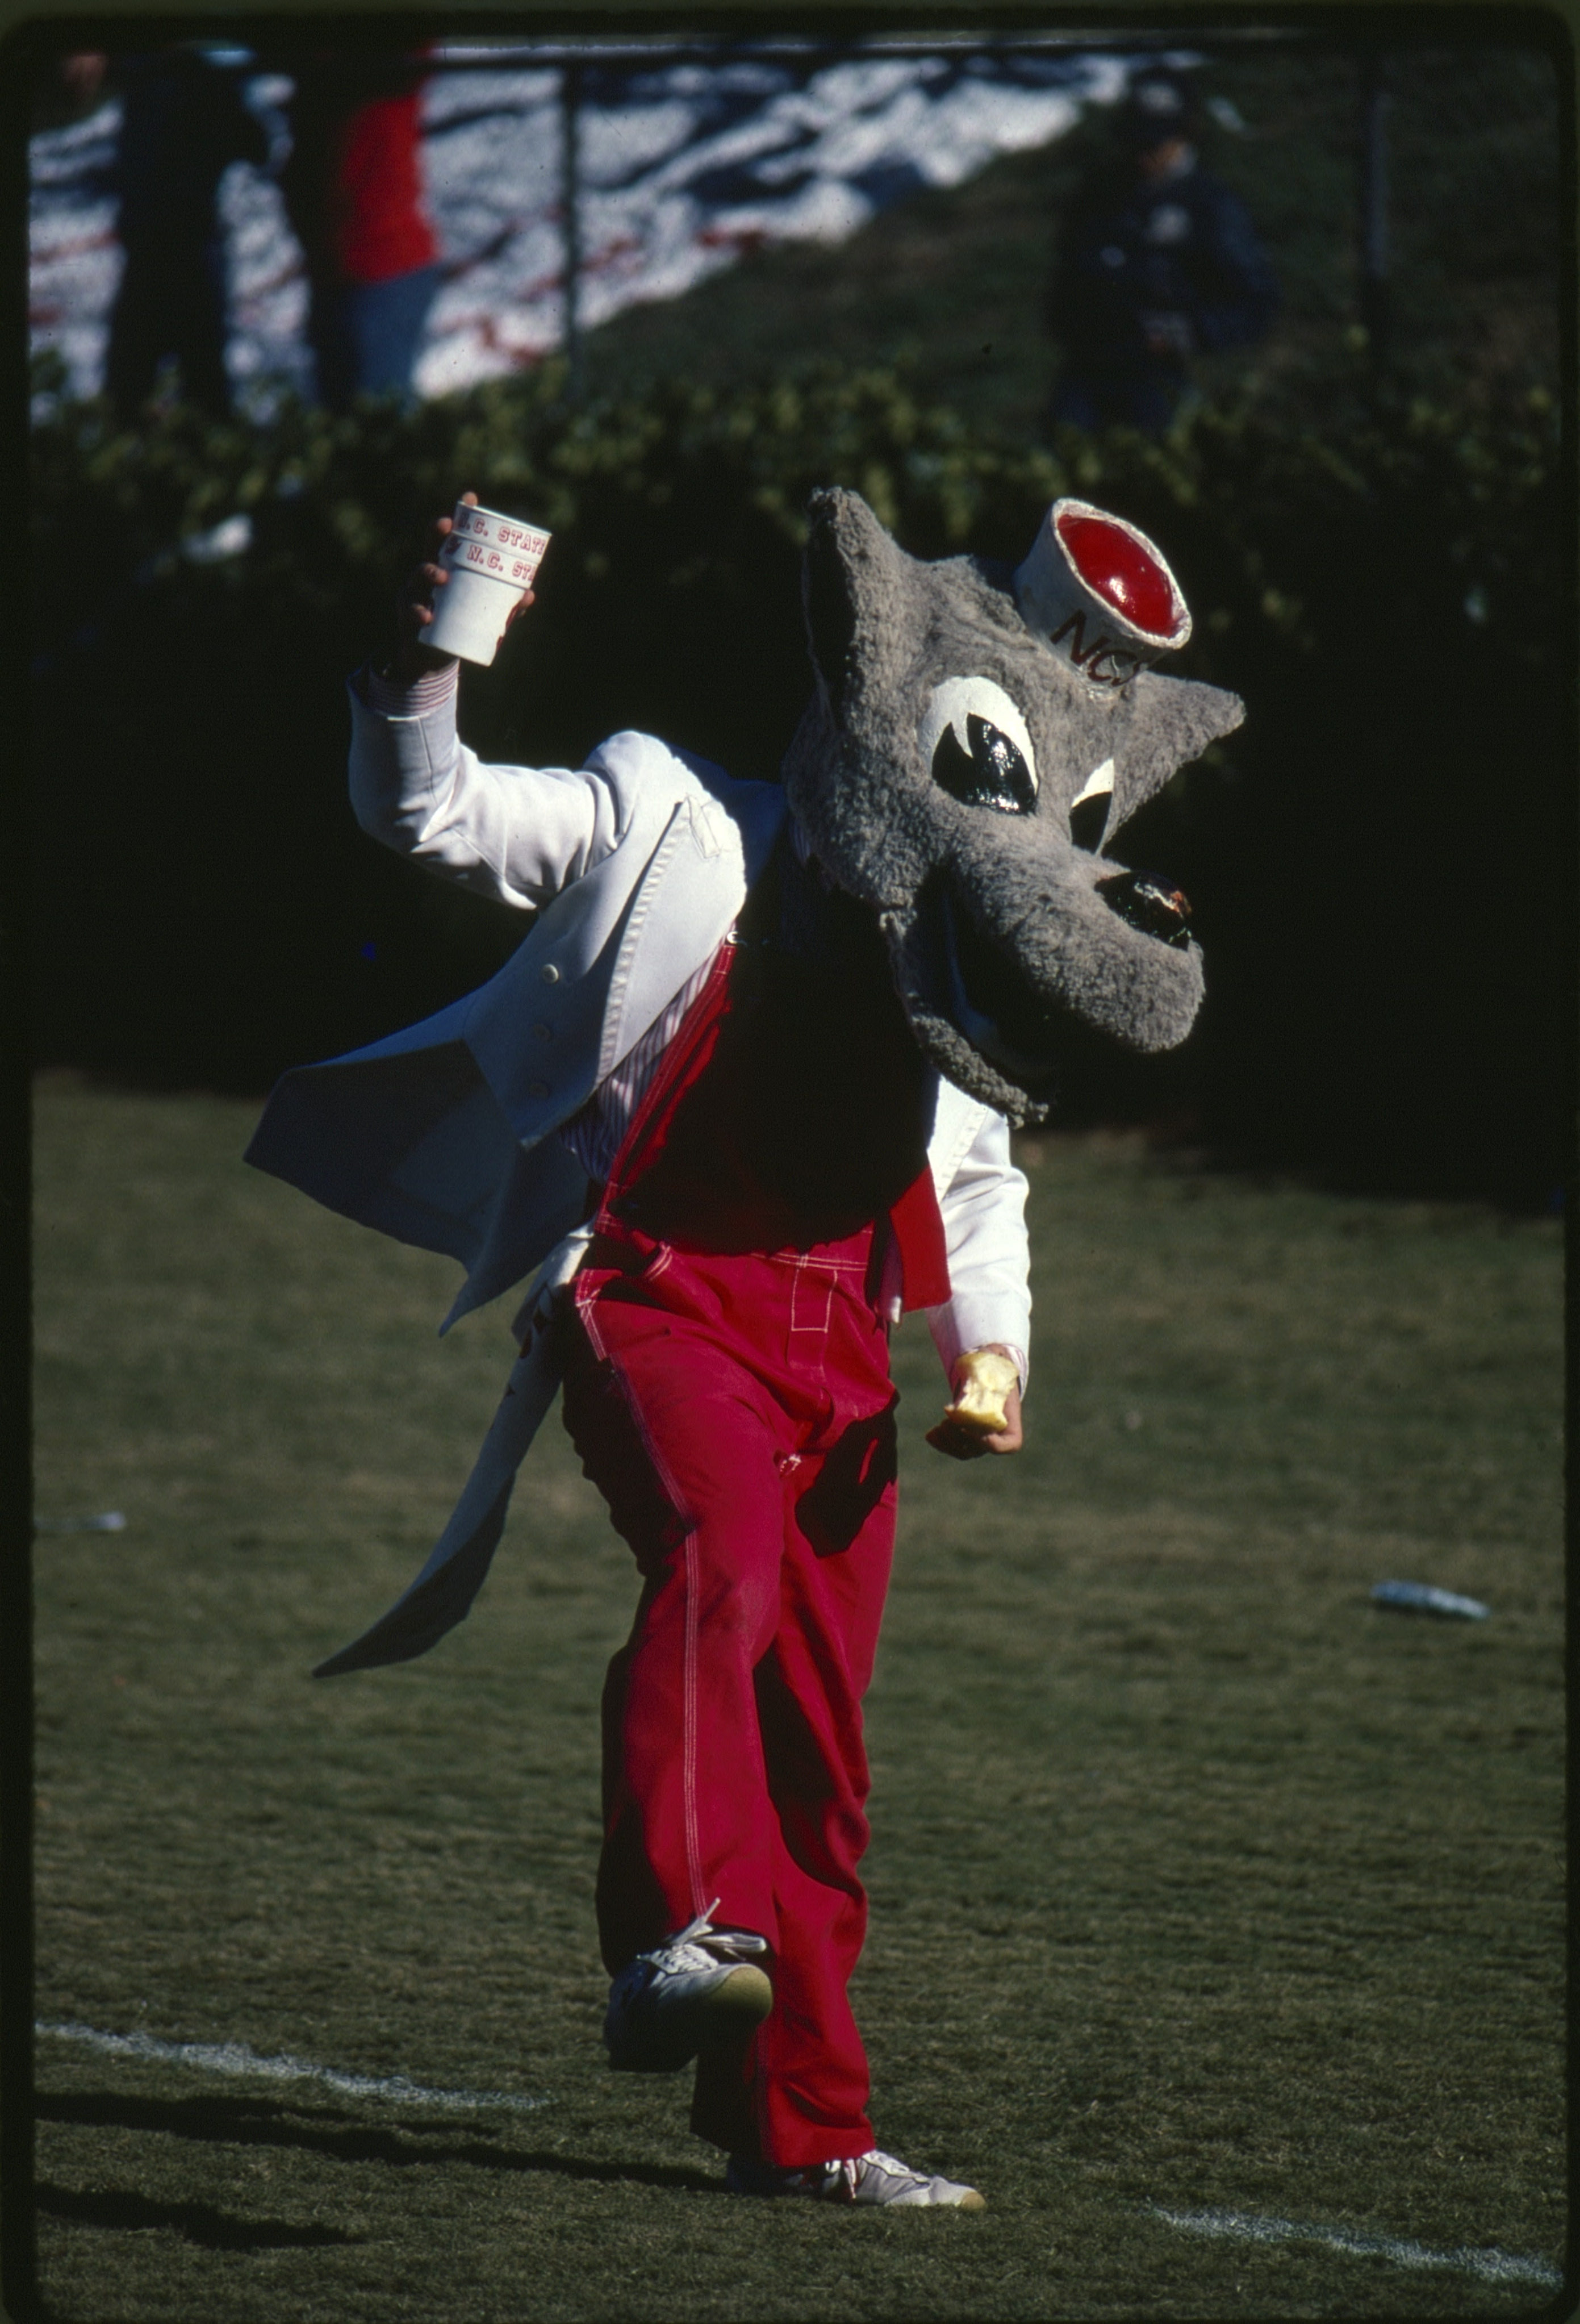 Mr. Wuf mascot, likely after an NC State game (1981)